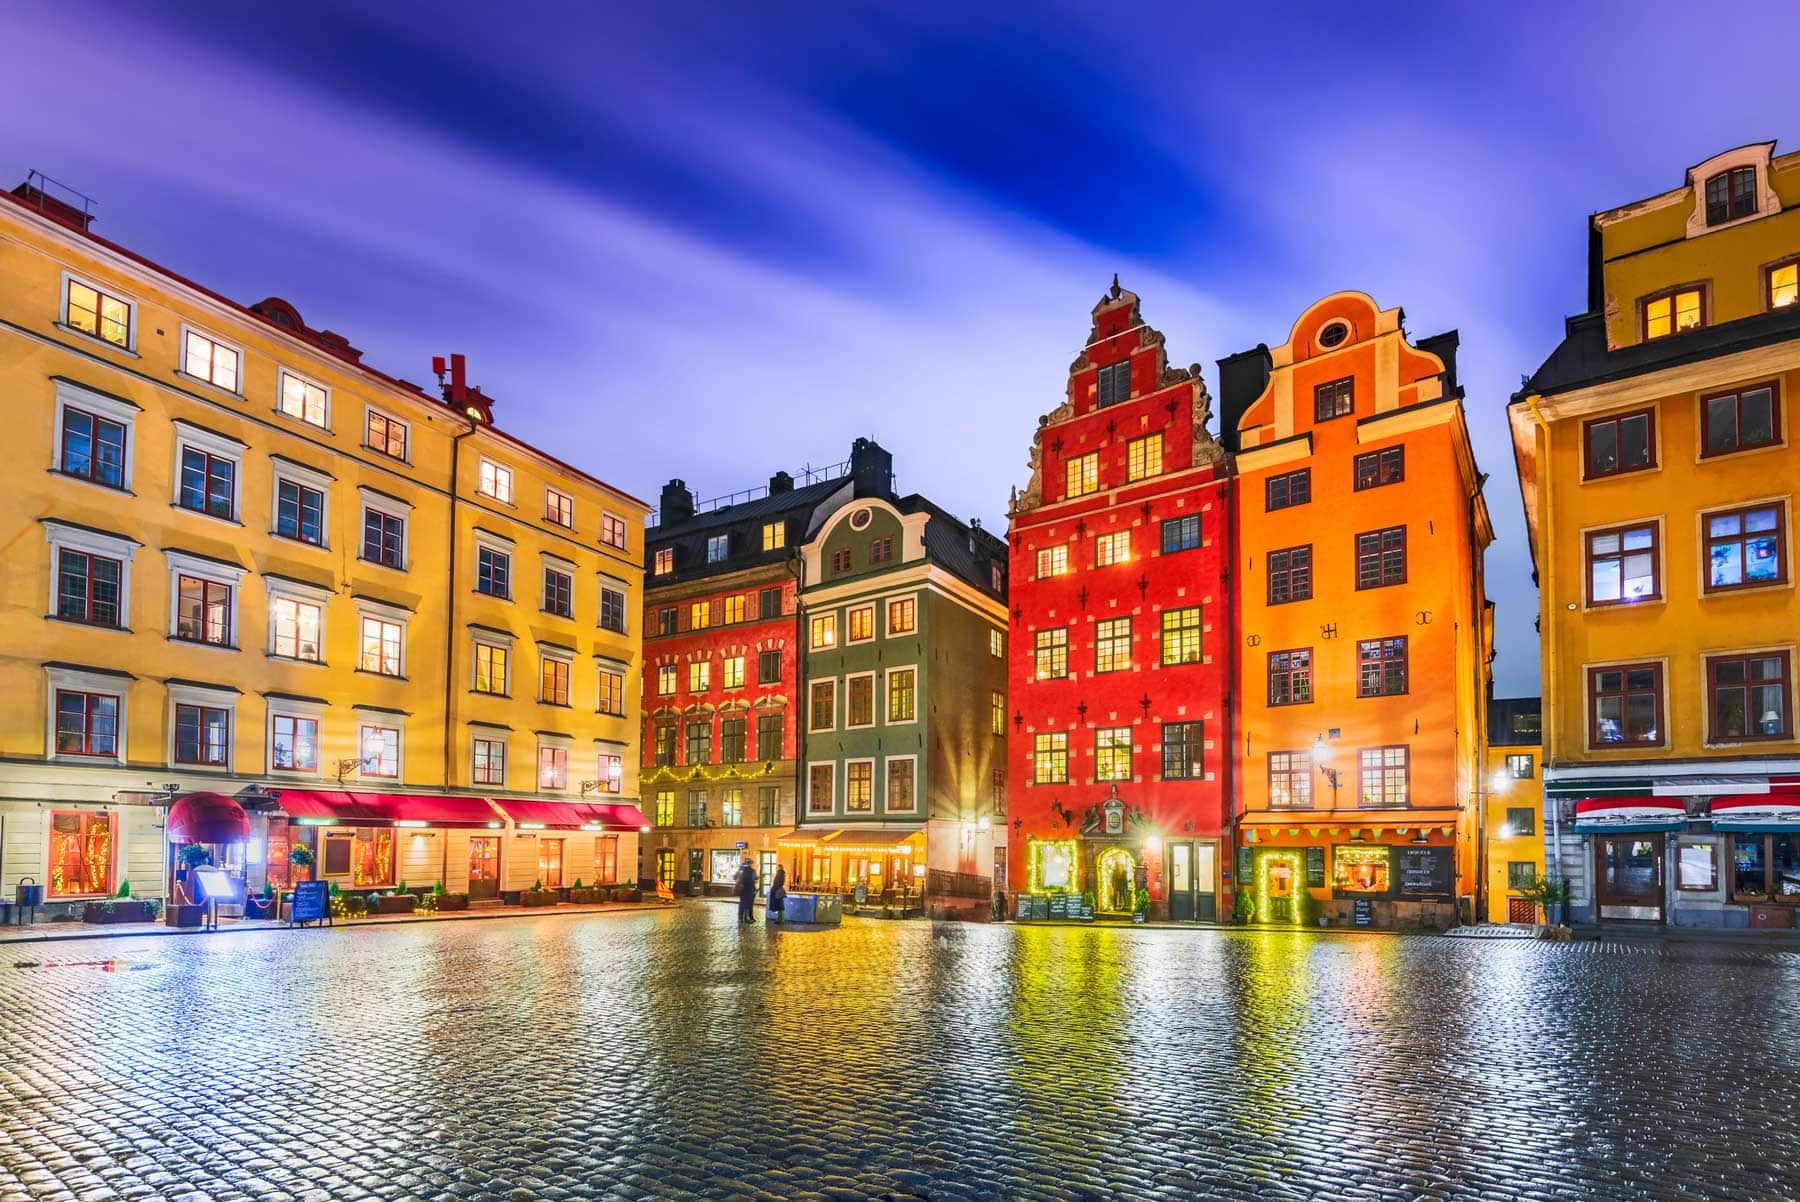 Gamla Stan is the Old Town in Stockholm, Sweden. Photo by istock